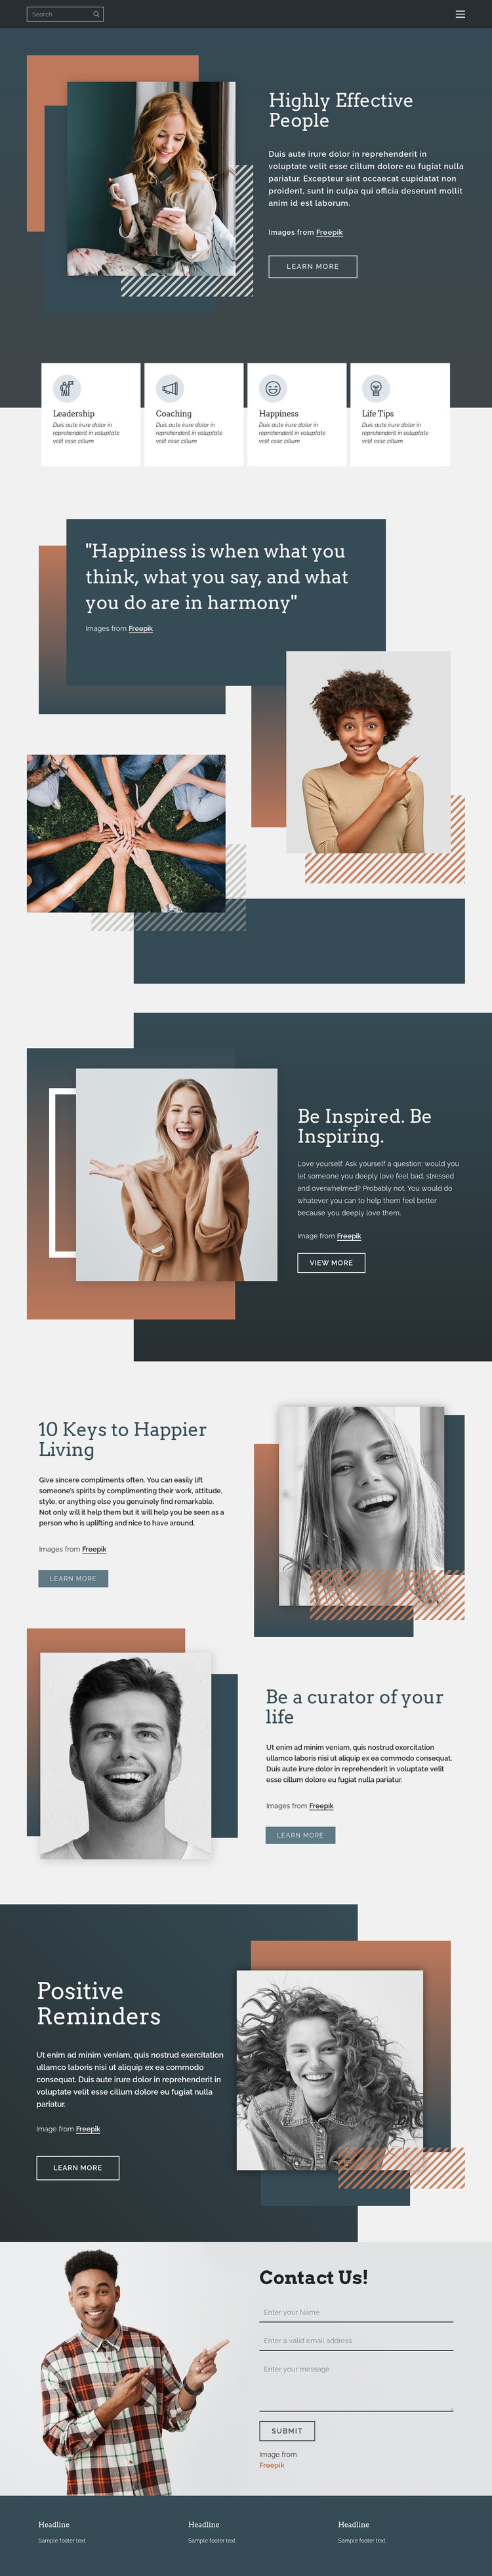 How to be successful in life HTML5 Template